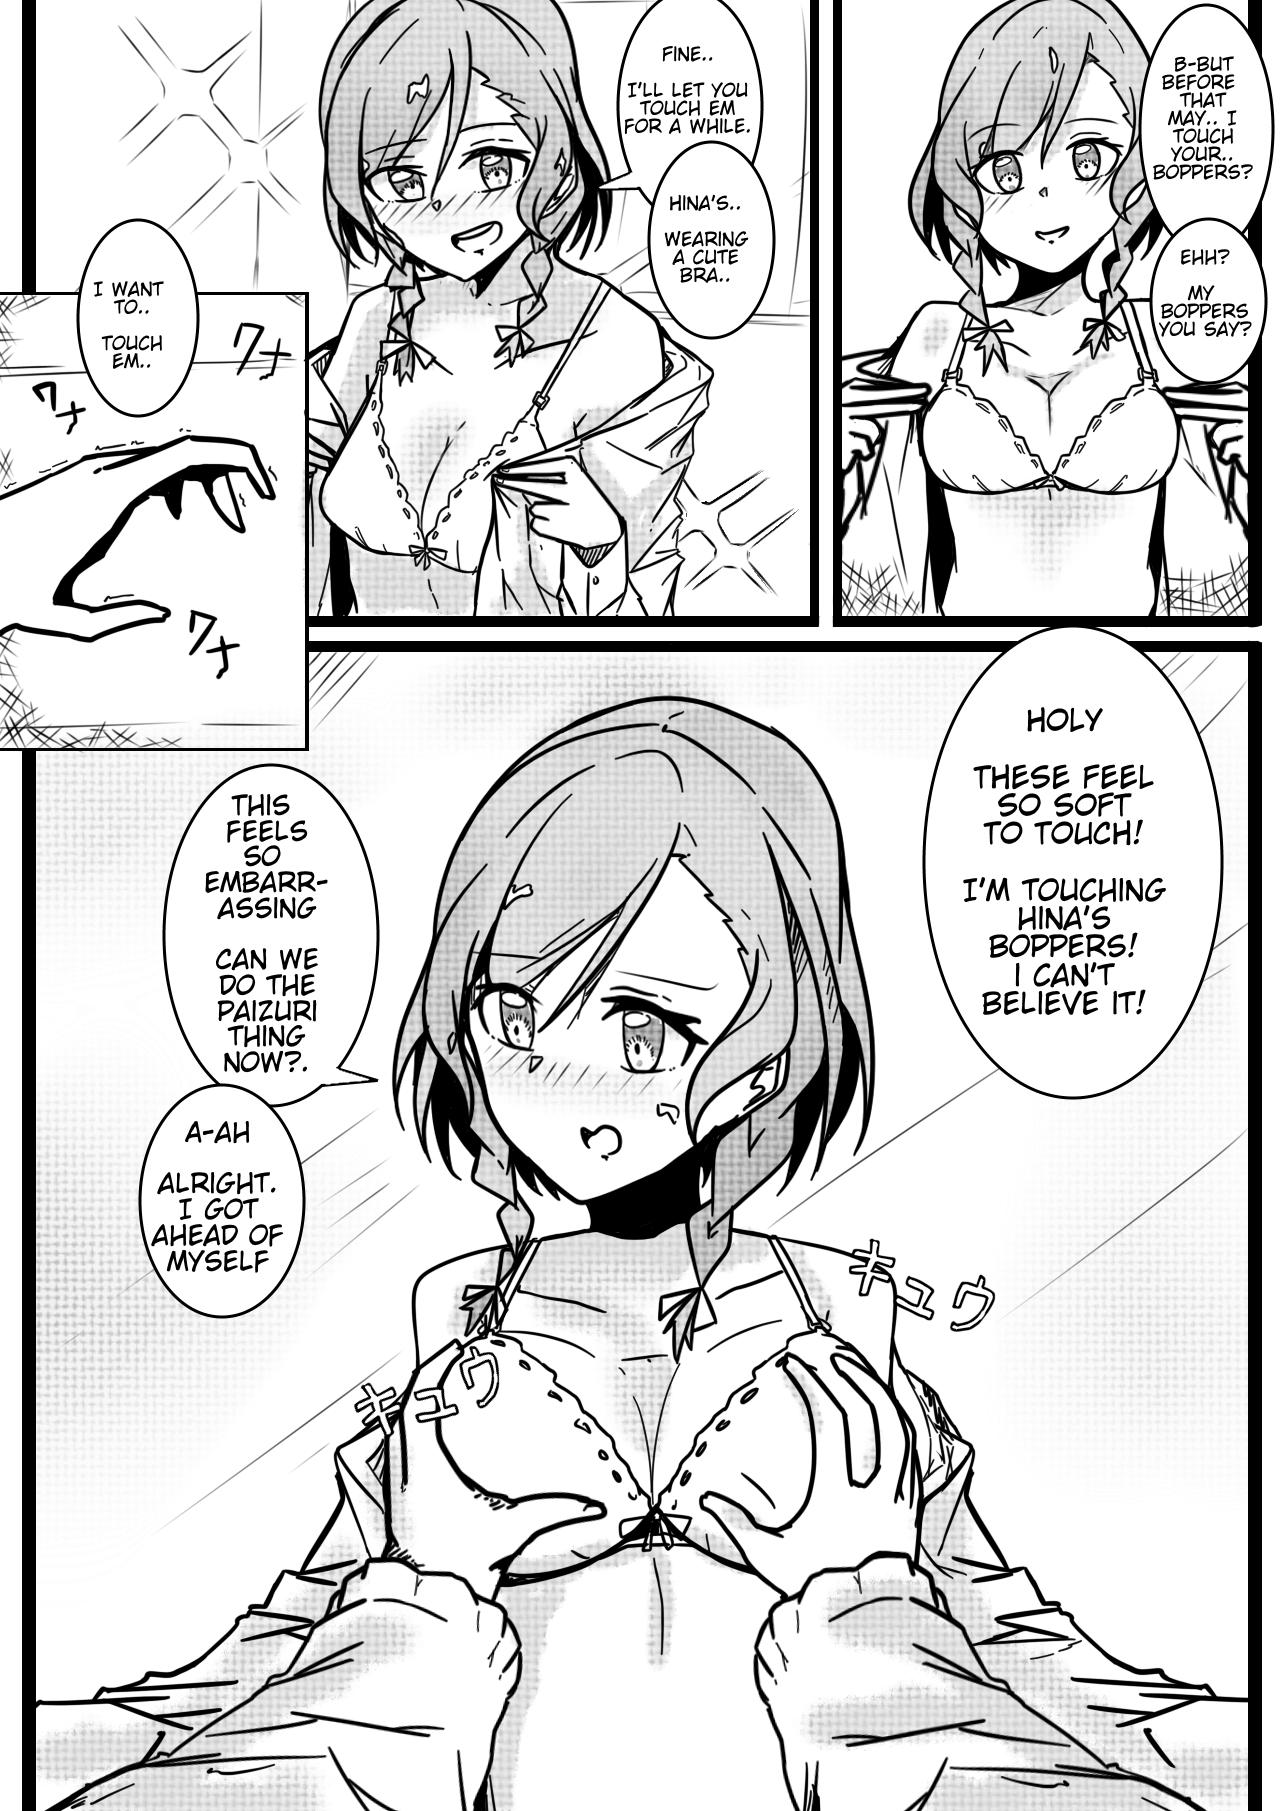 Concha Minty Surprise - Bang dream Making Love Porn - Page 13